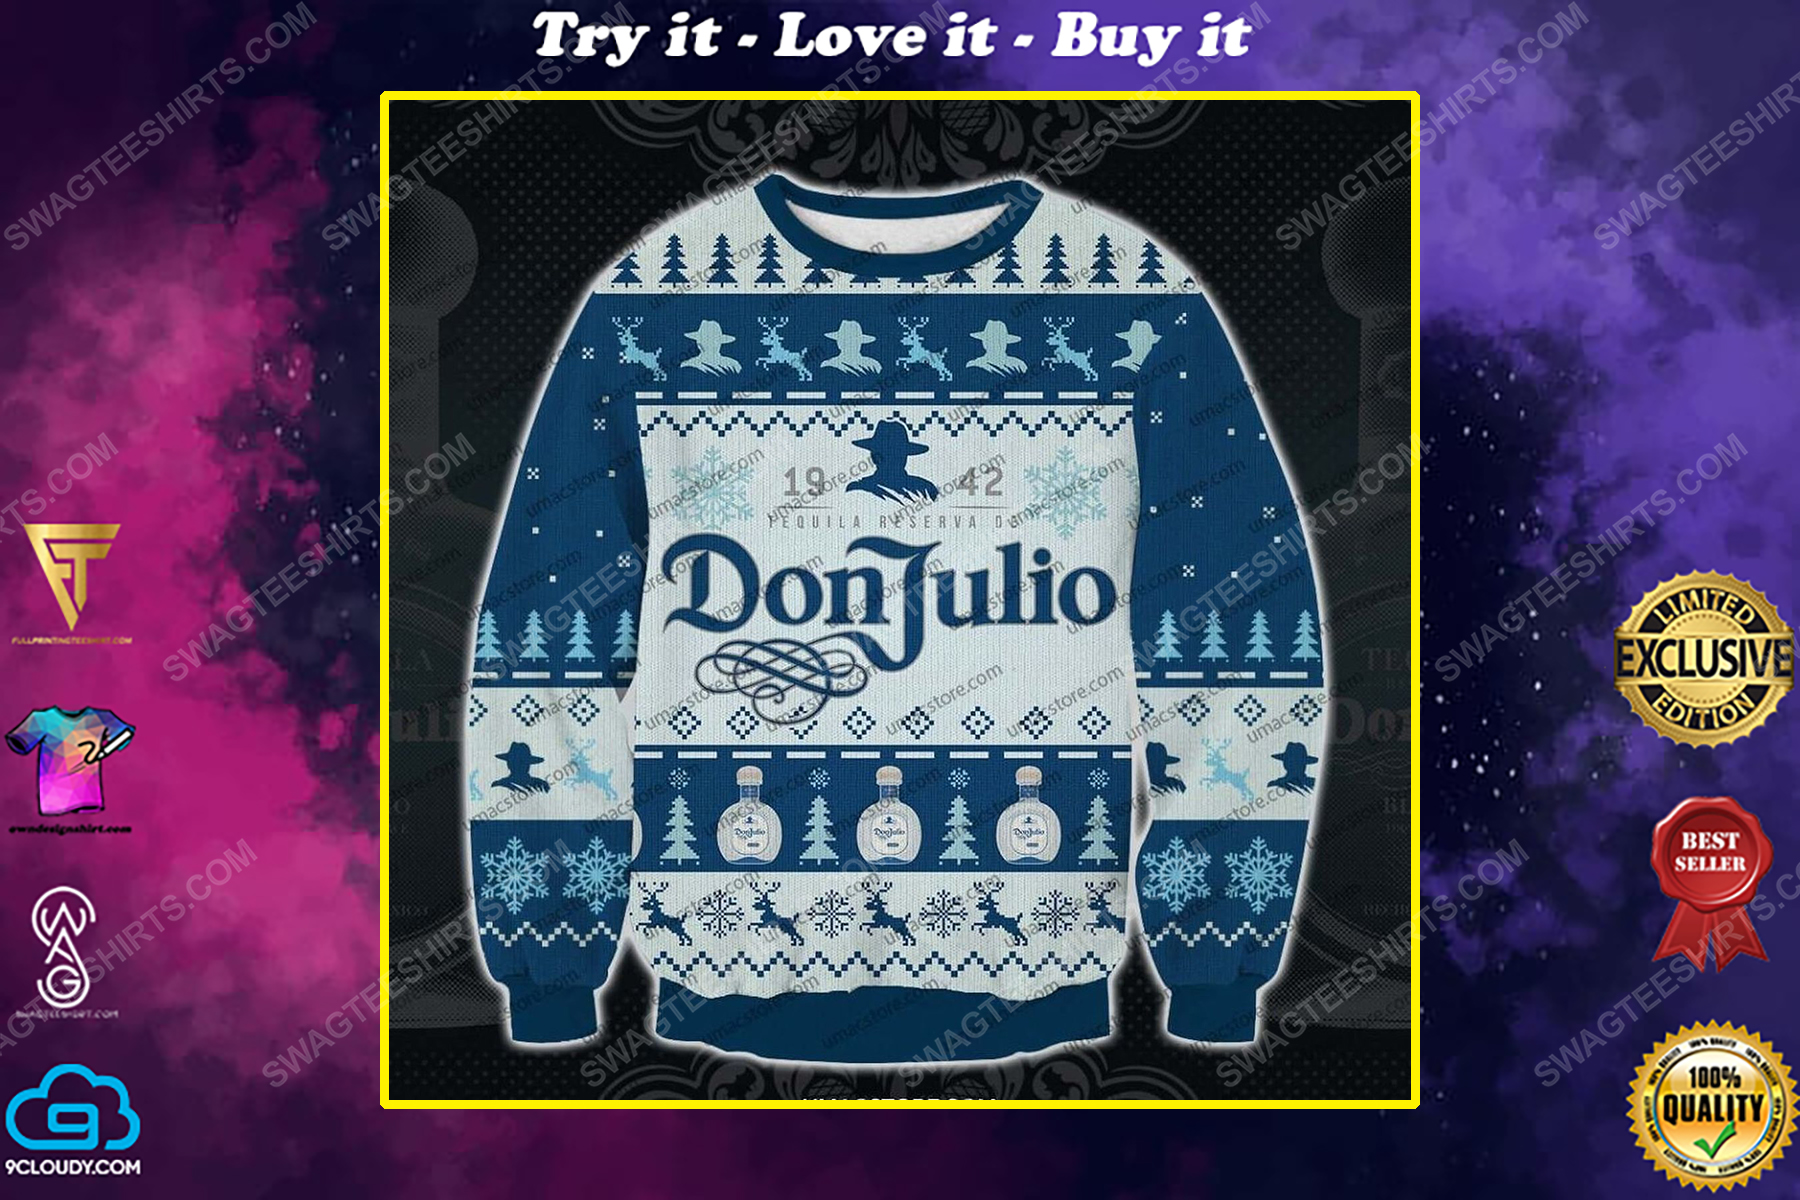 Don julio 1942 tequila ugly christmas sweater 1